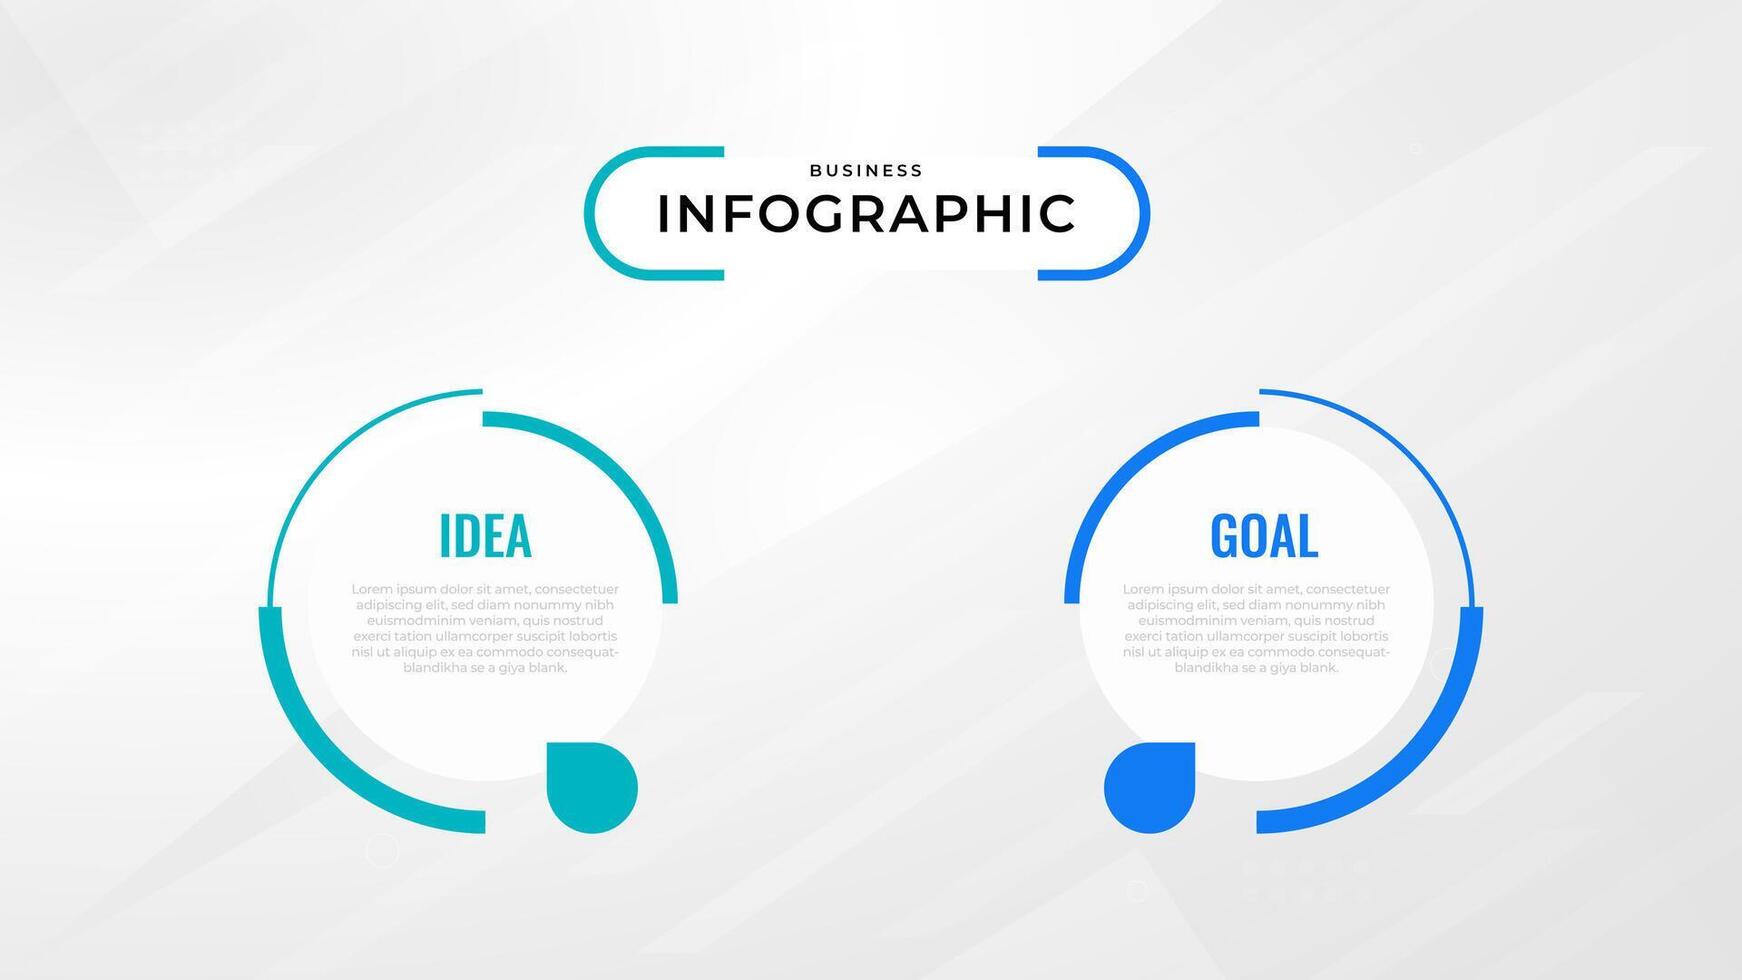 Two Step Infographic label design template with line icons. process steps diagram, presentations, workflow layout, banner, flow chart, info graph illustration. vector